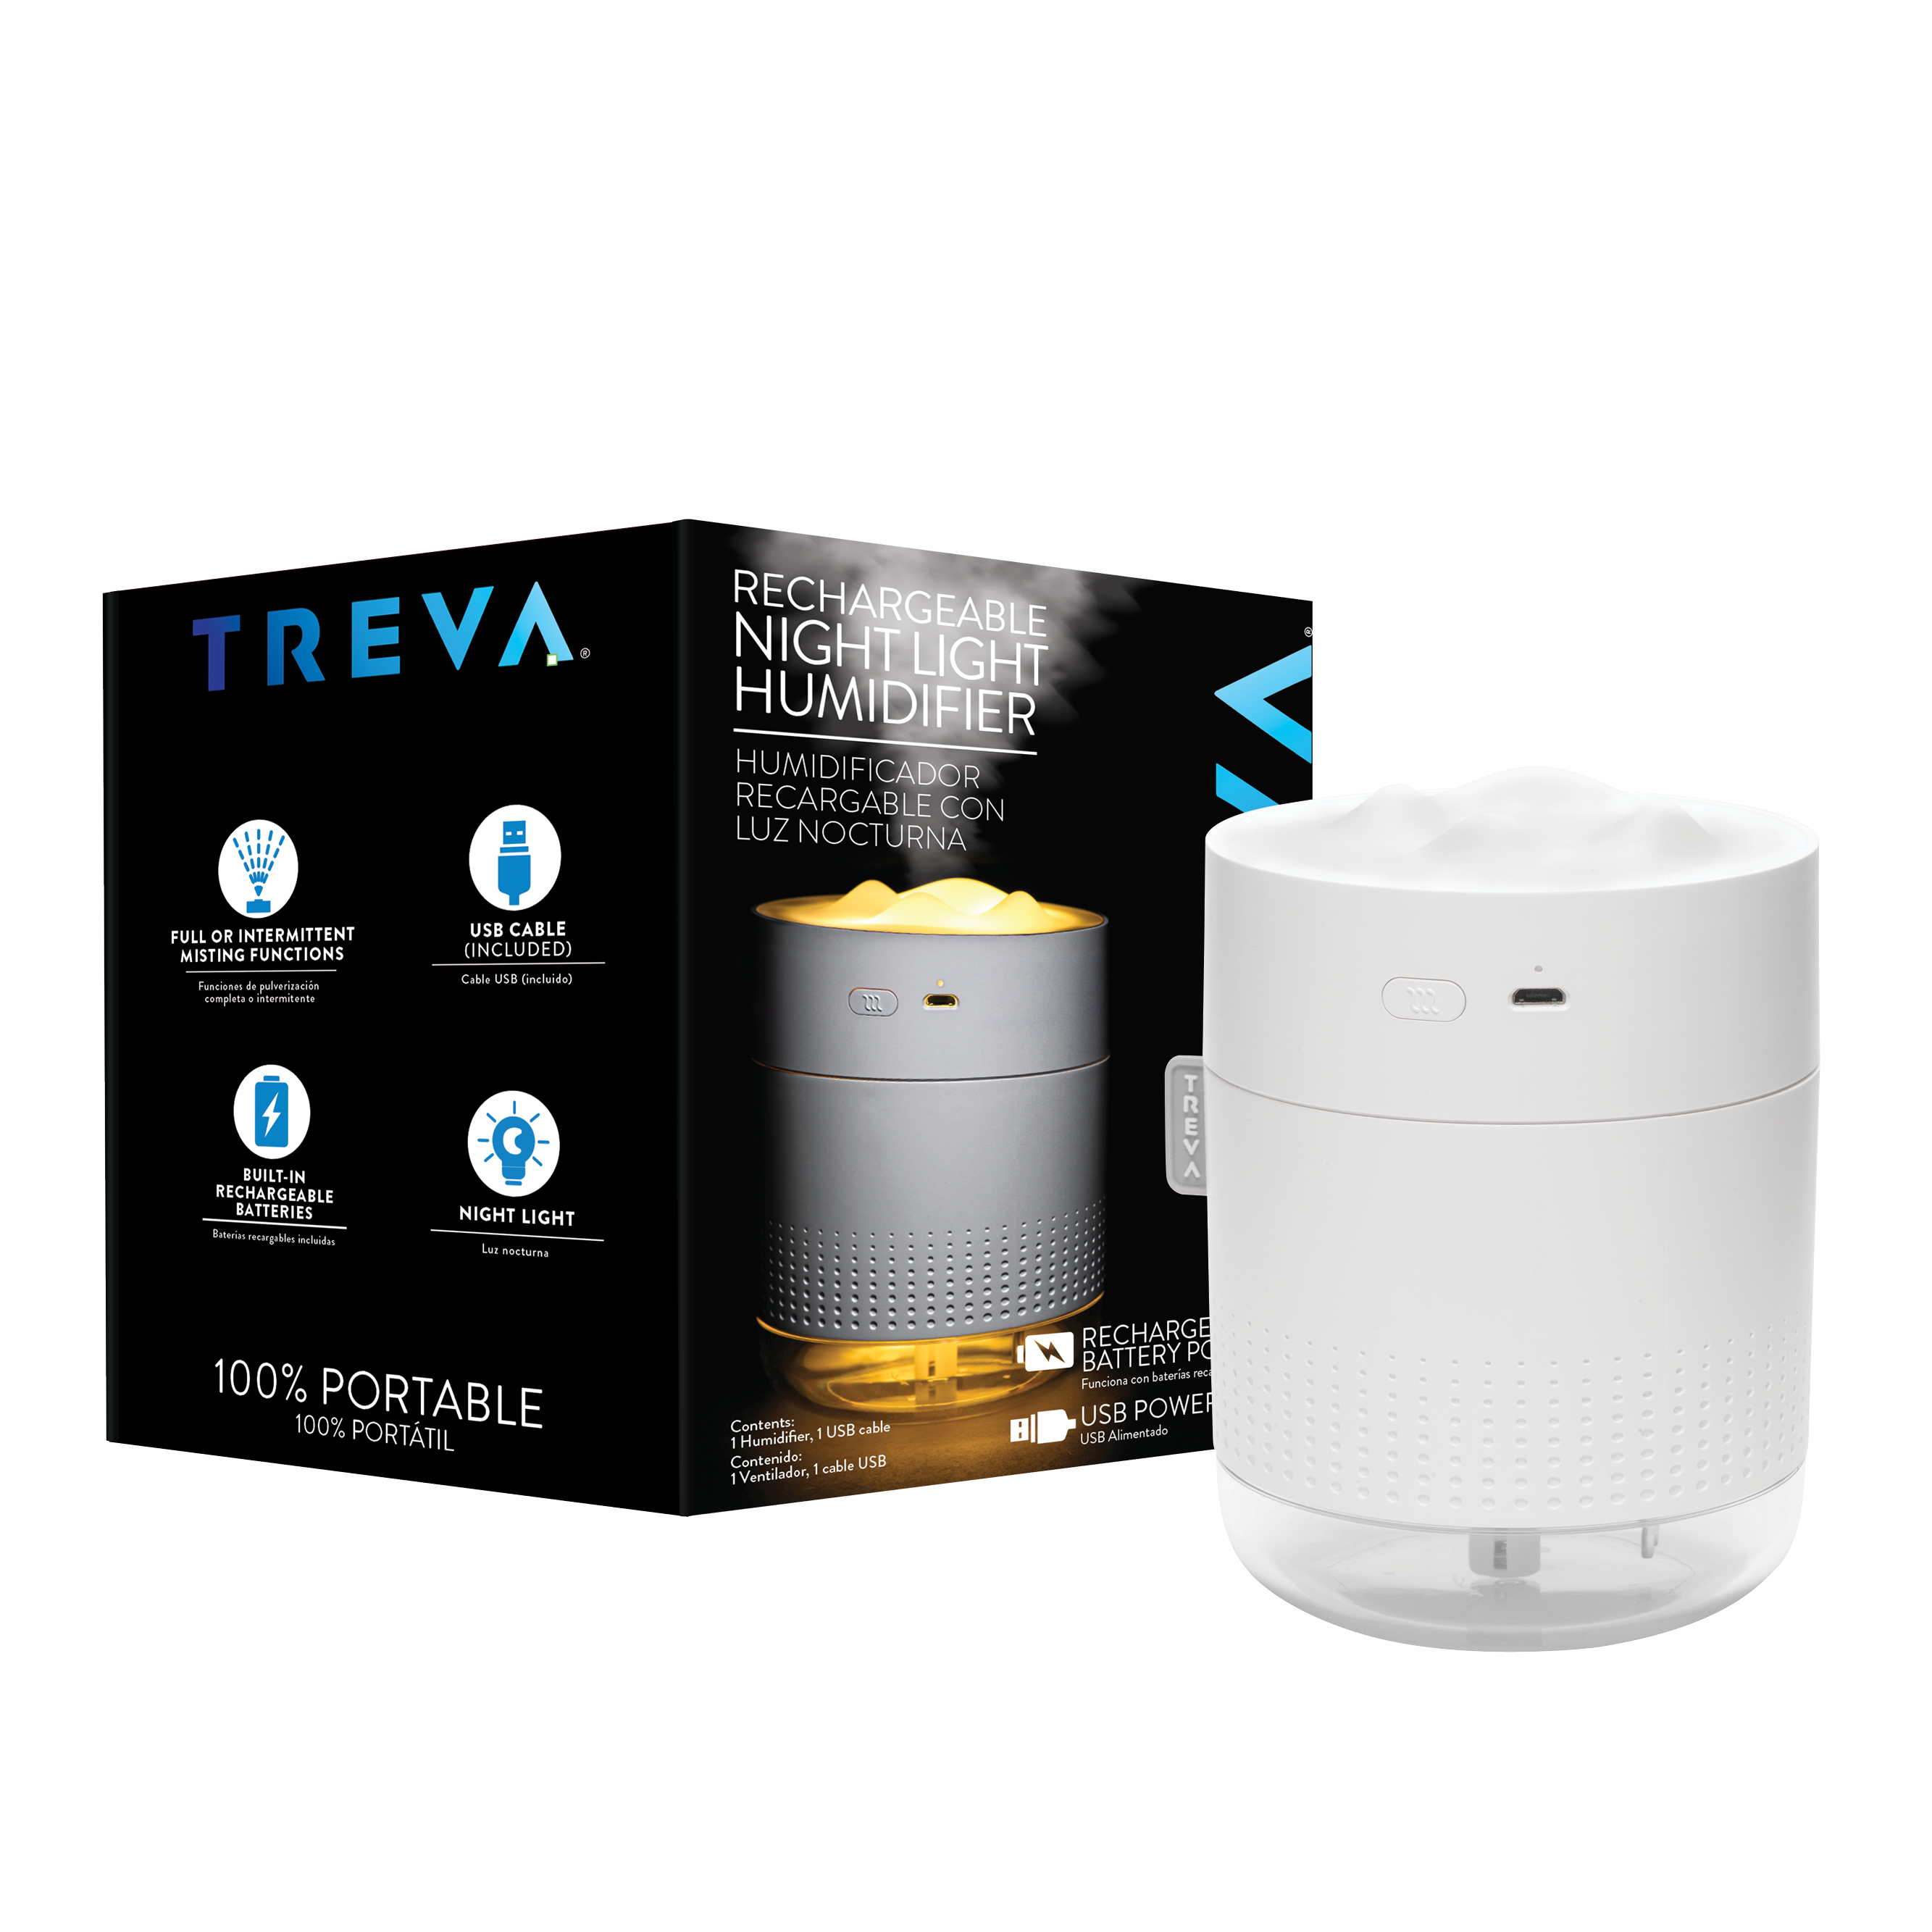 Treva Rechargeable Cool Mist Travel Humidifier, 500 ml with Nightlight - image 2 of 7